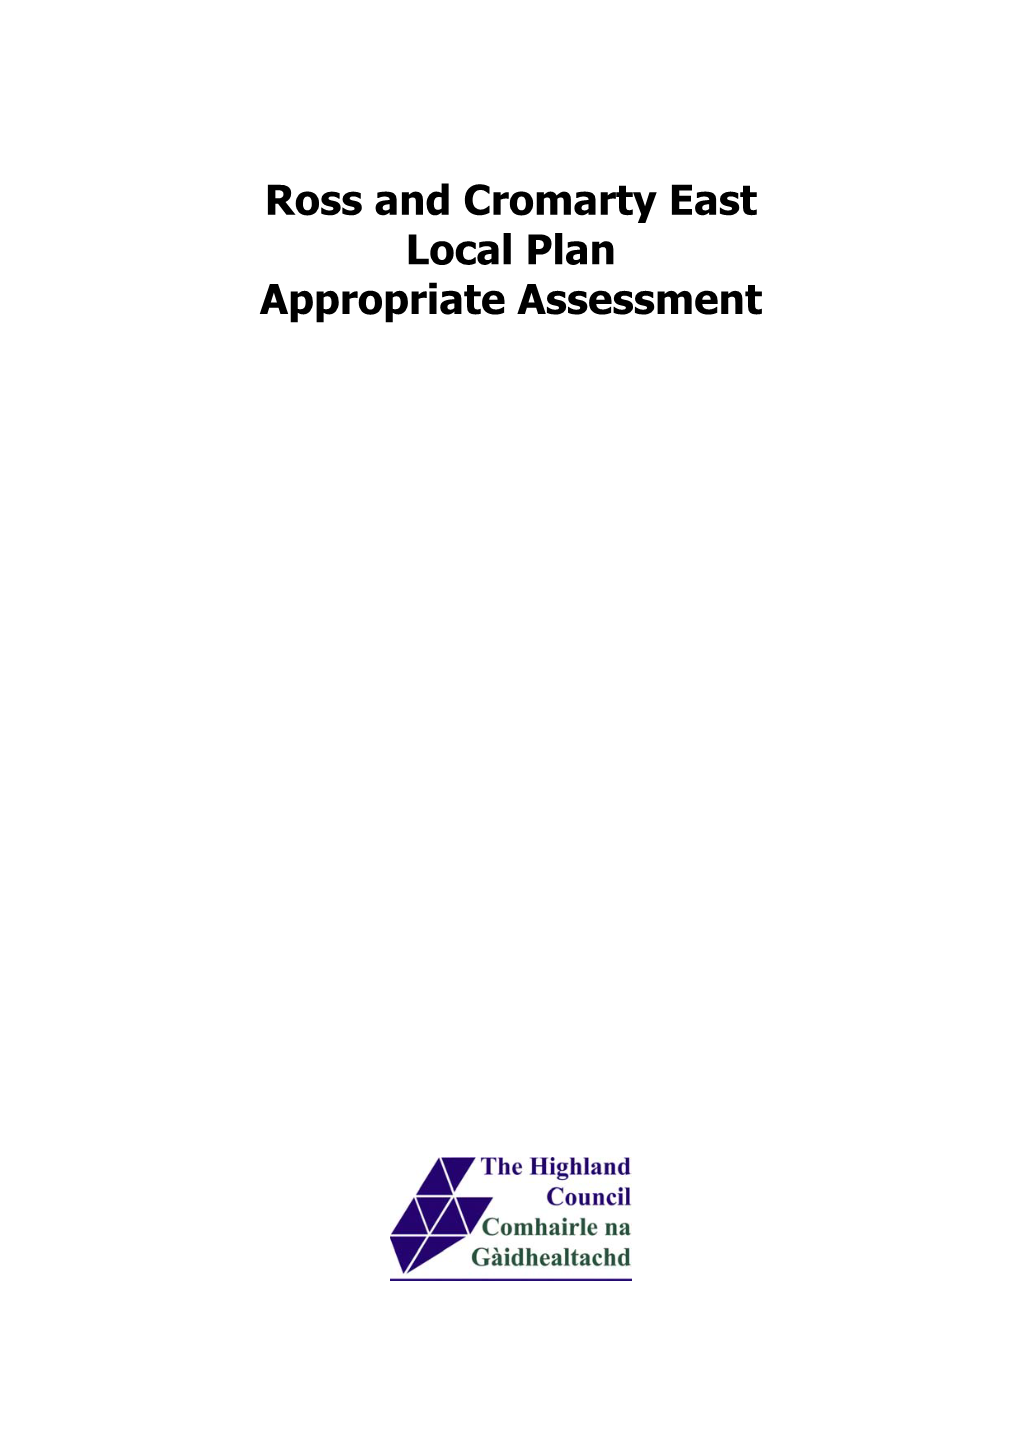 Ross and Cromarty East Local Plan Appropriate Assessment Introduction